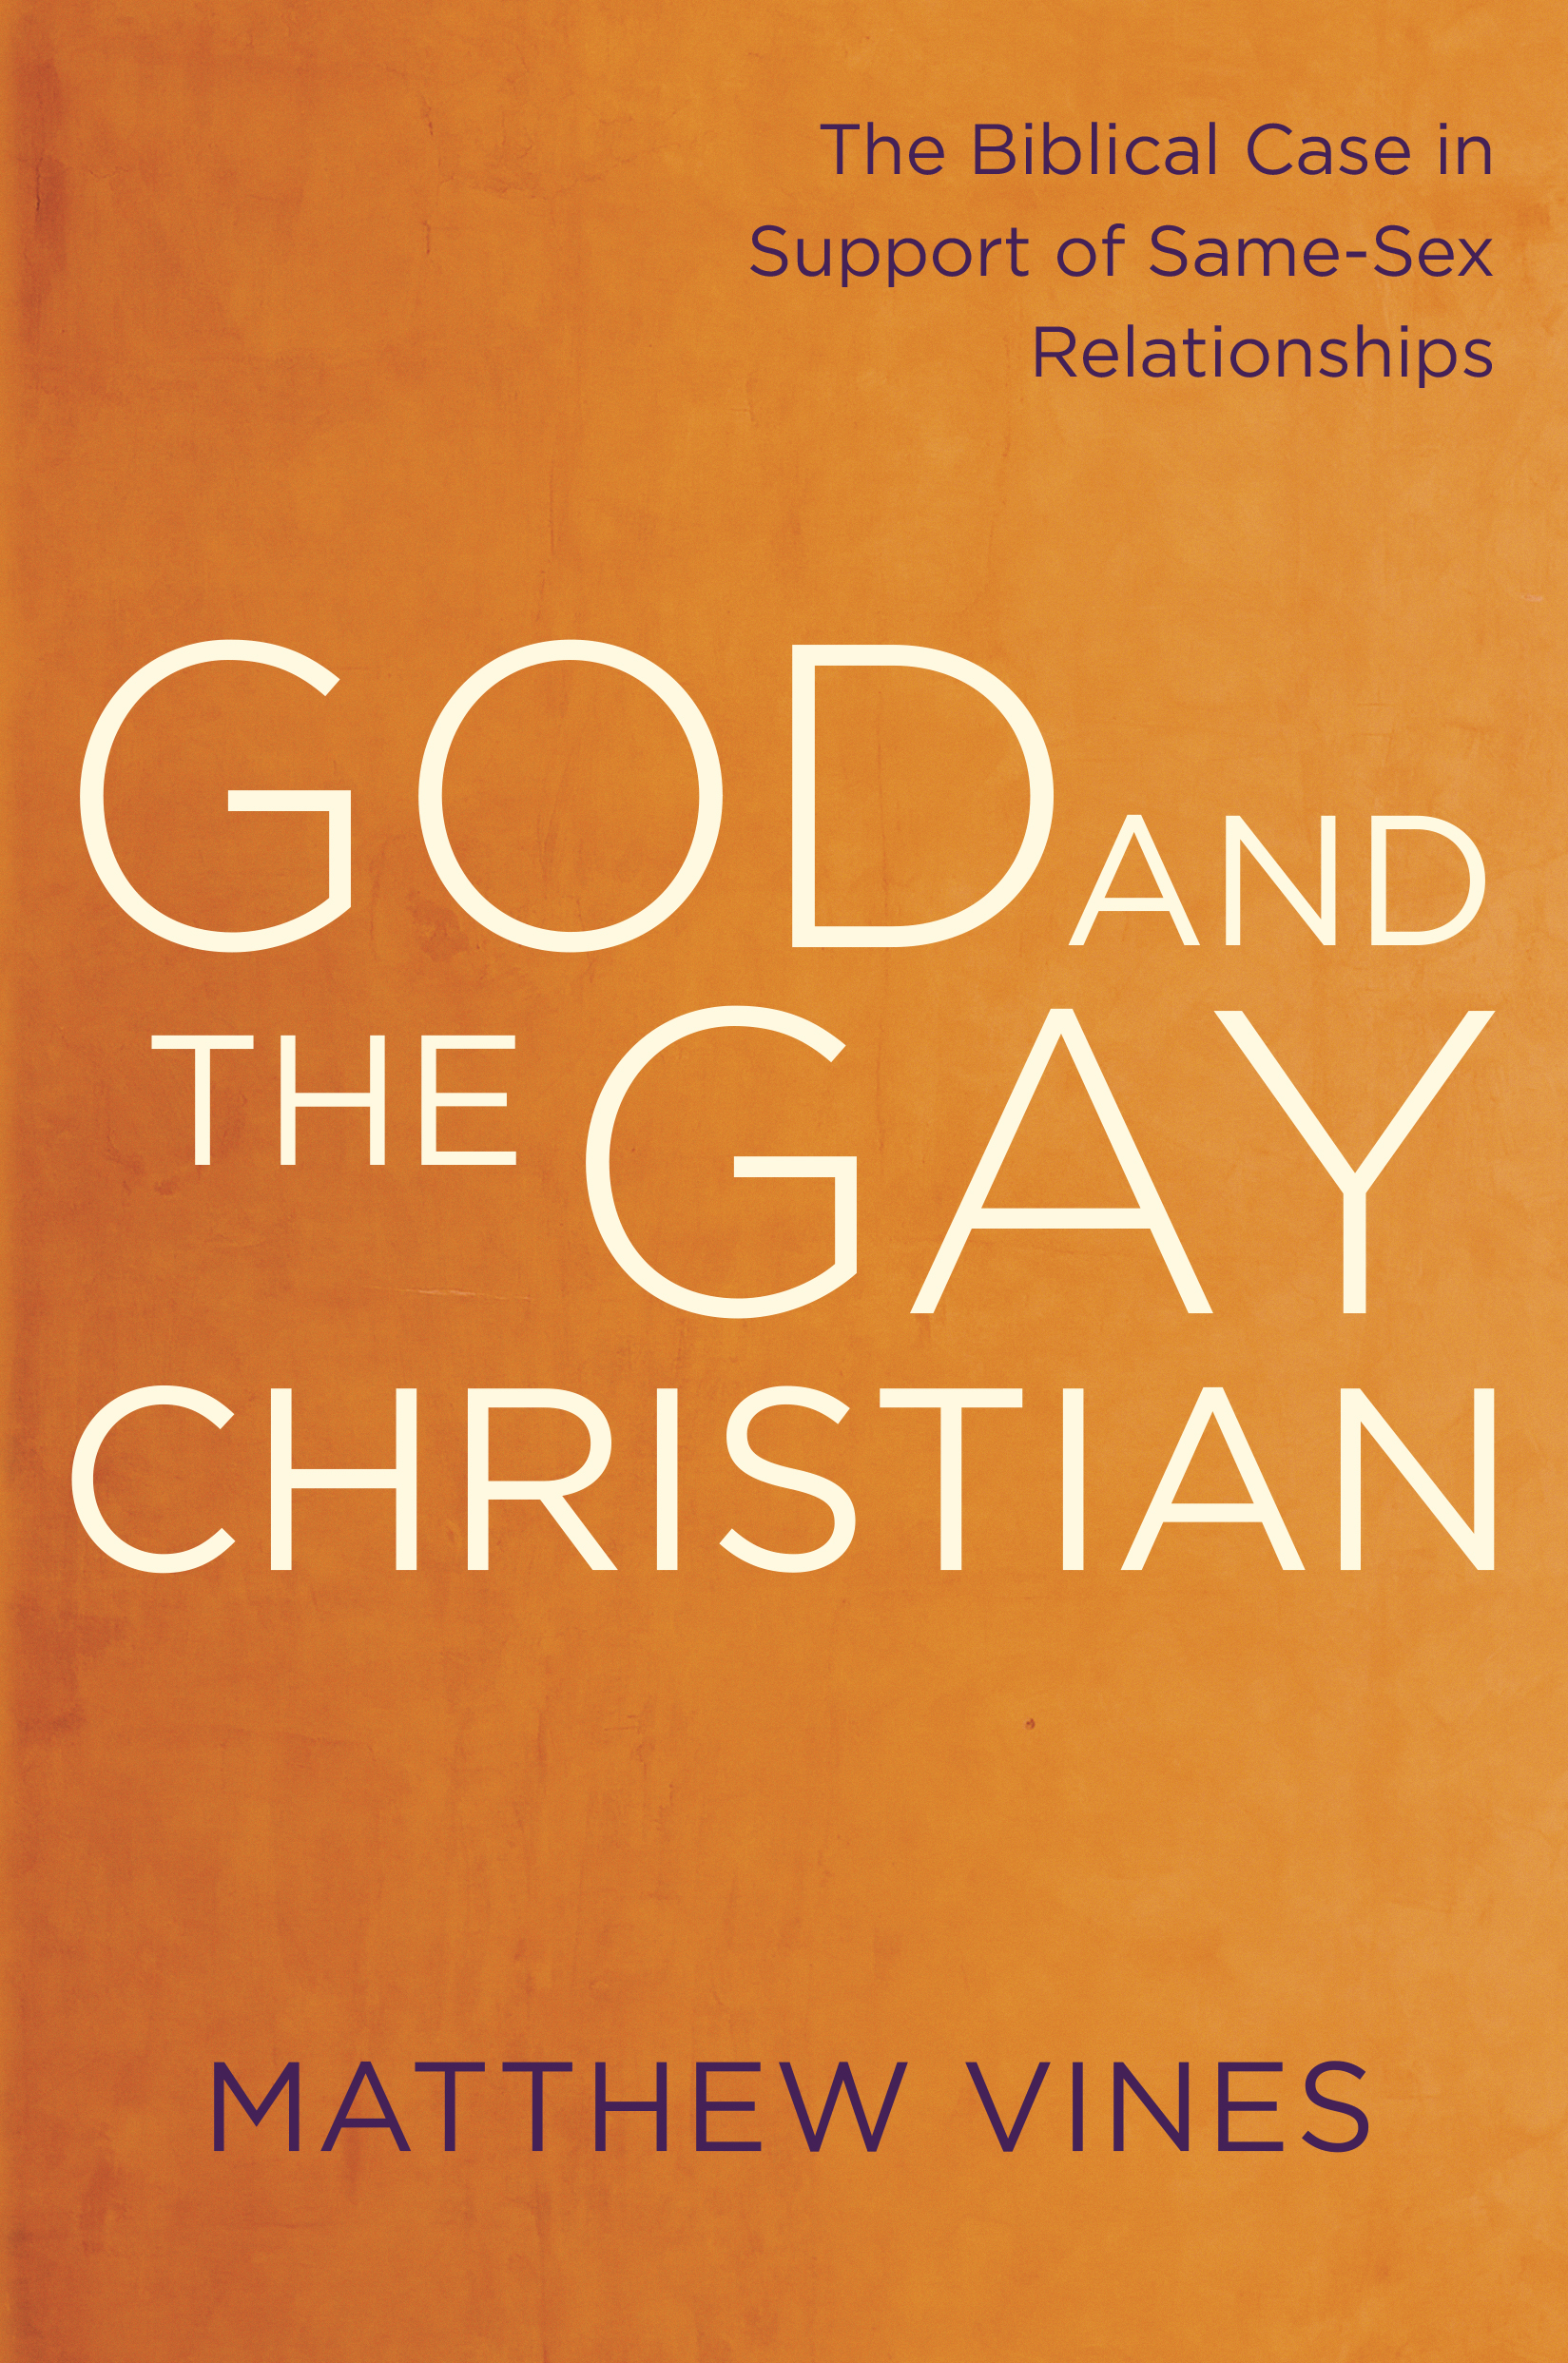 'God and the Gay Christian,' by Matthew Vines